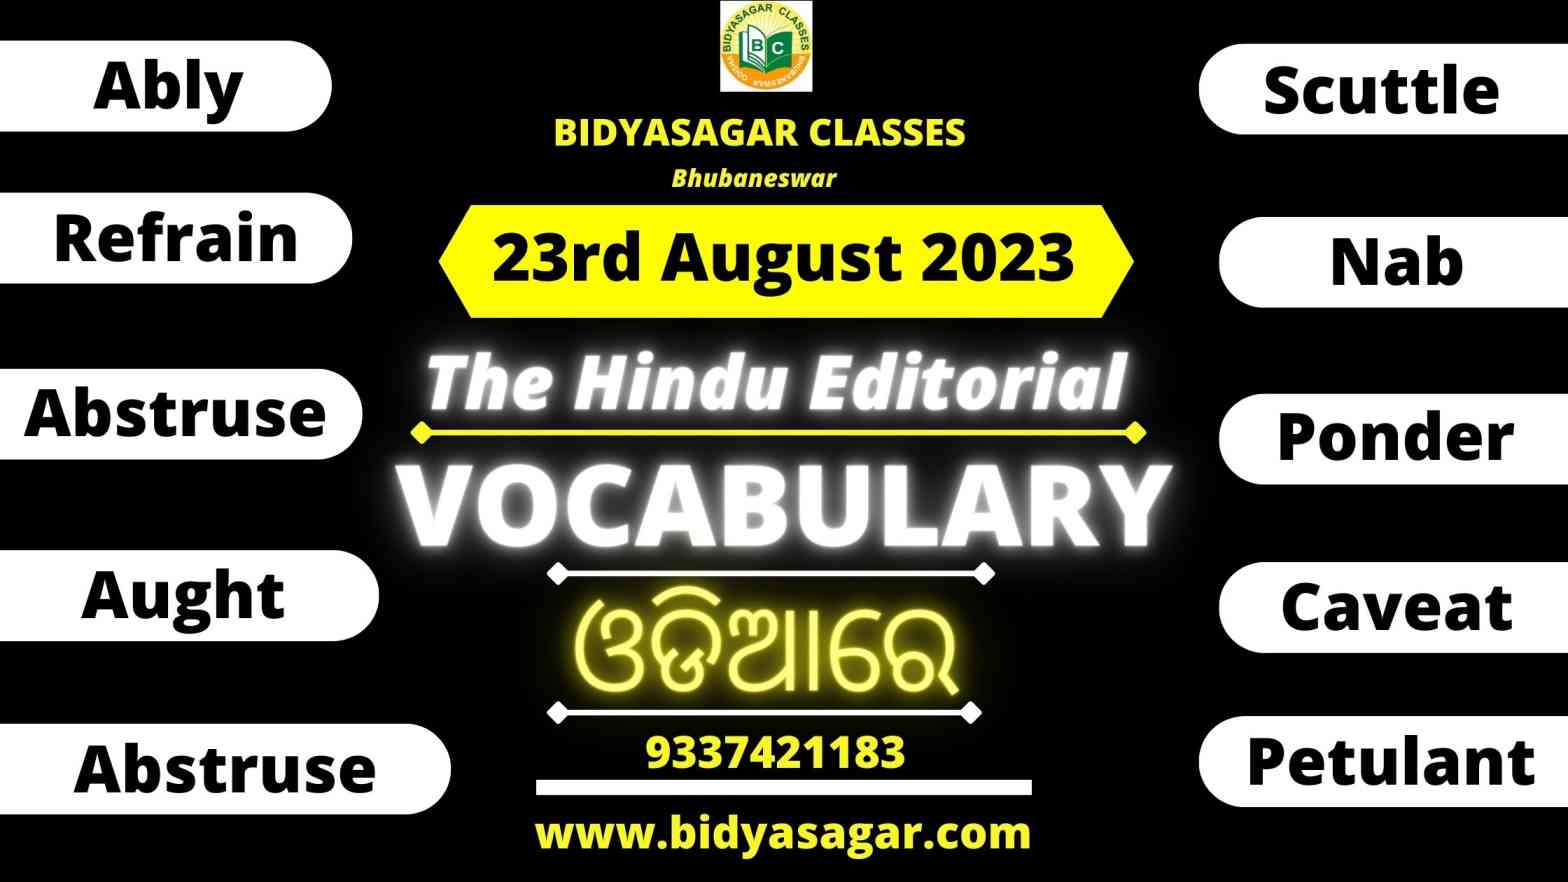 The Hindu Editorial Vocabulary of 23rd August 2023